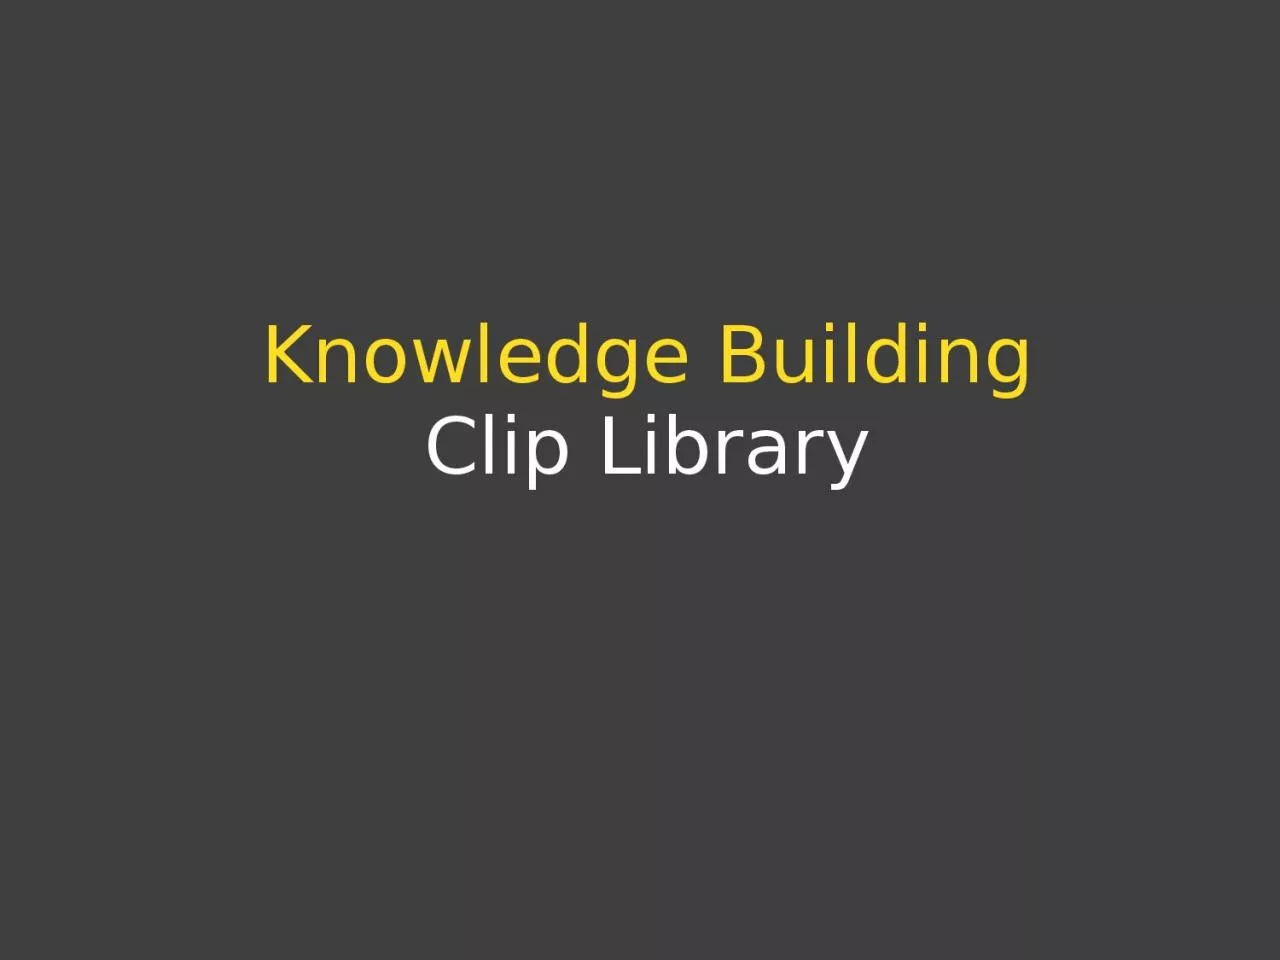 Knowledge Building Clip Library